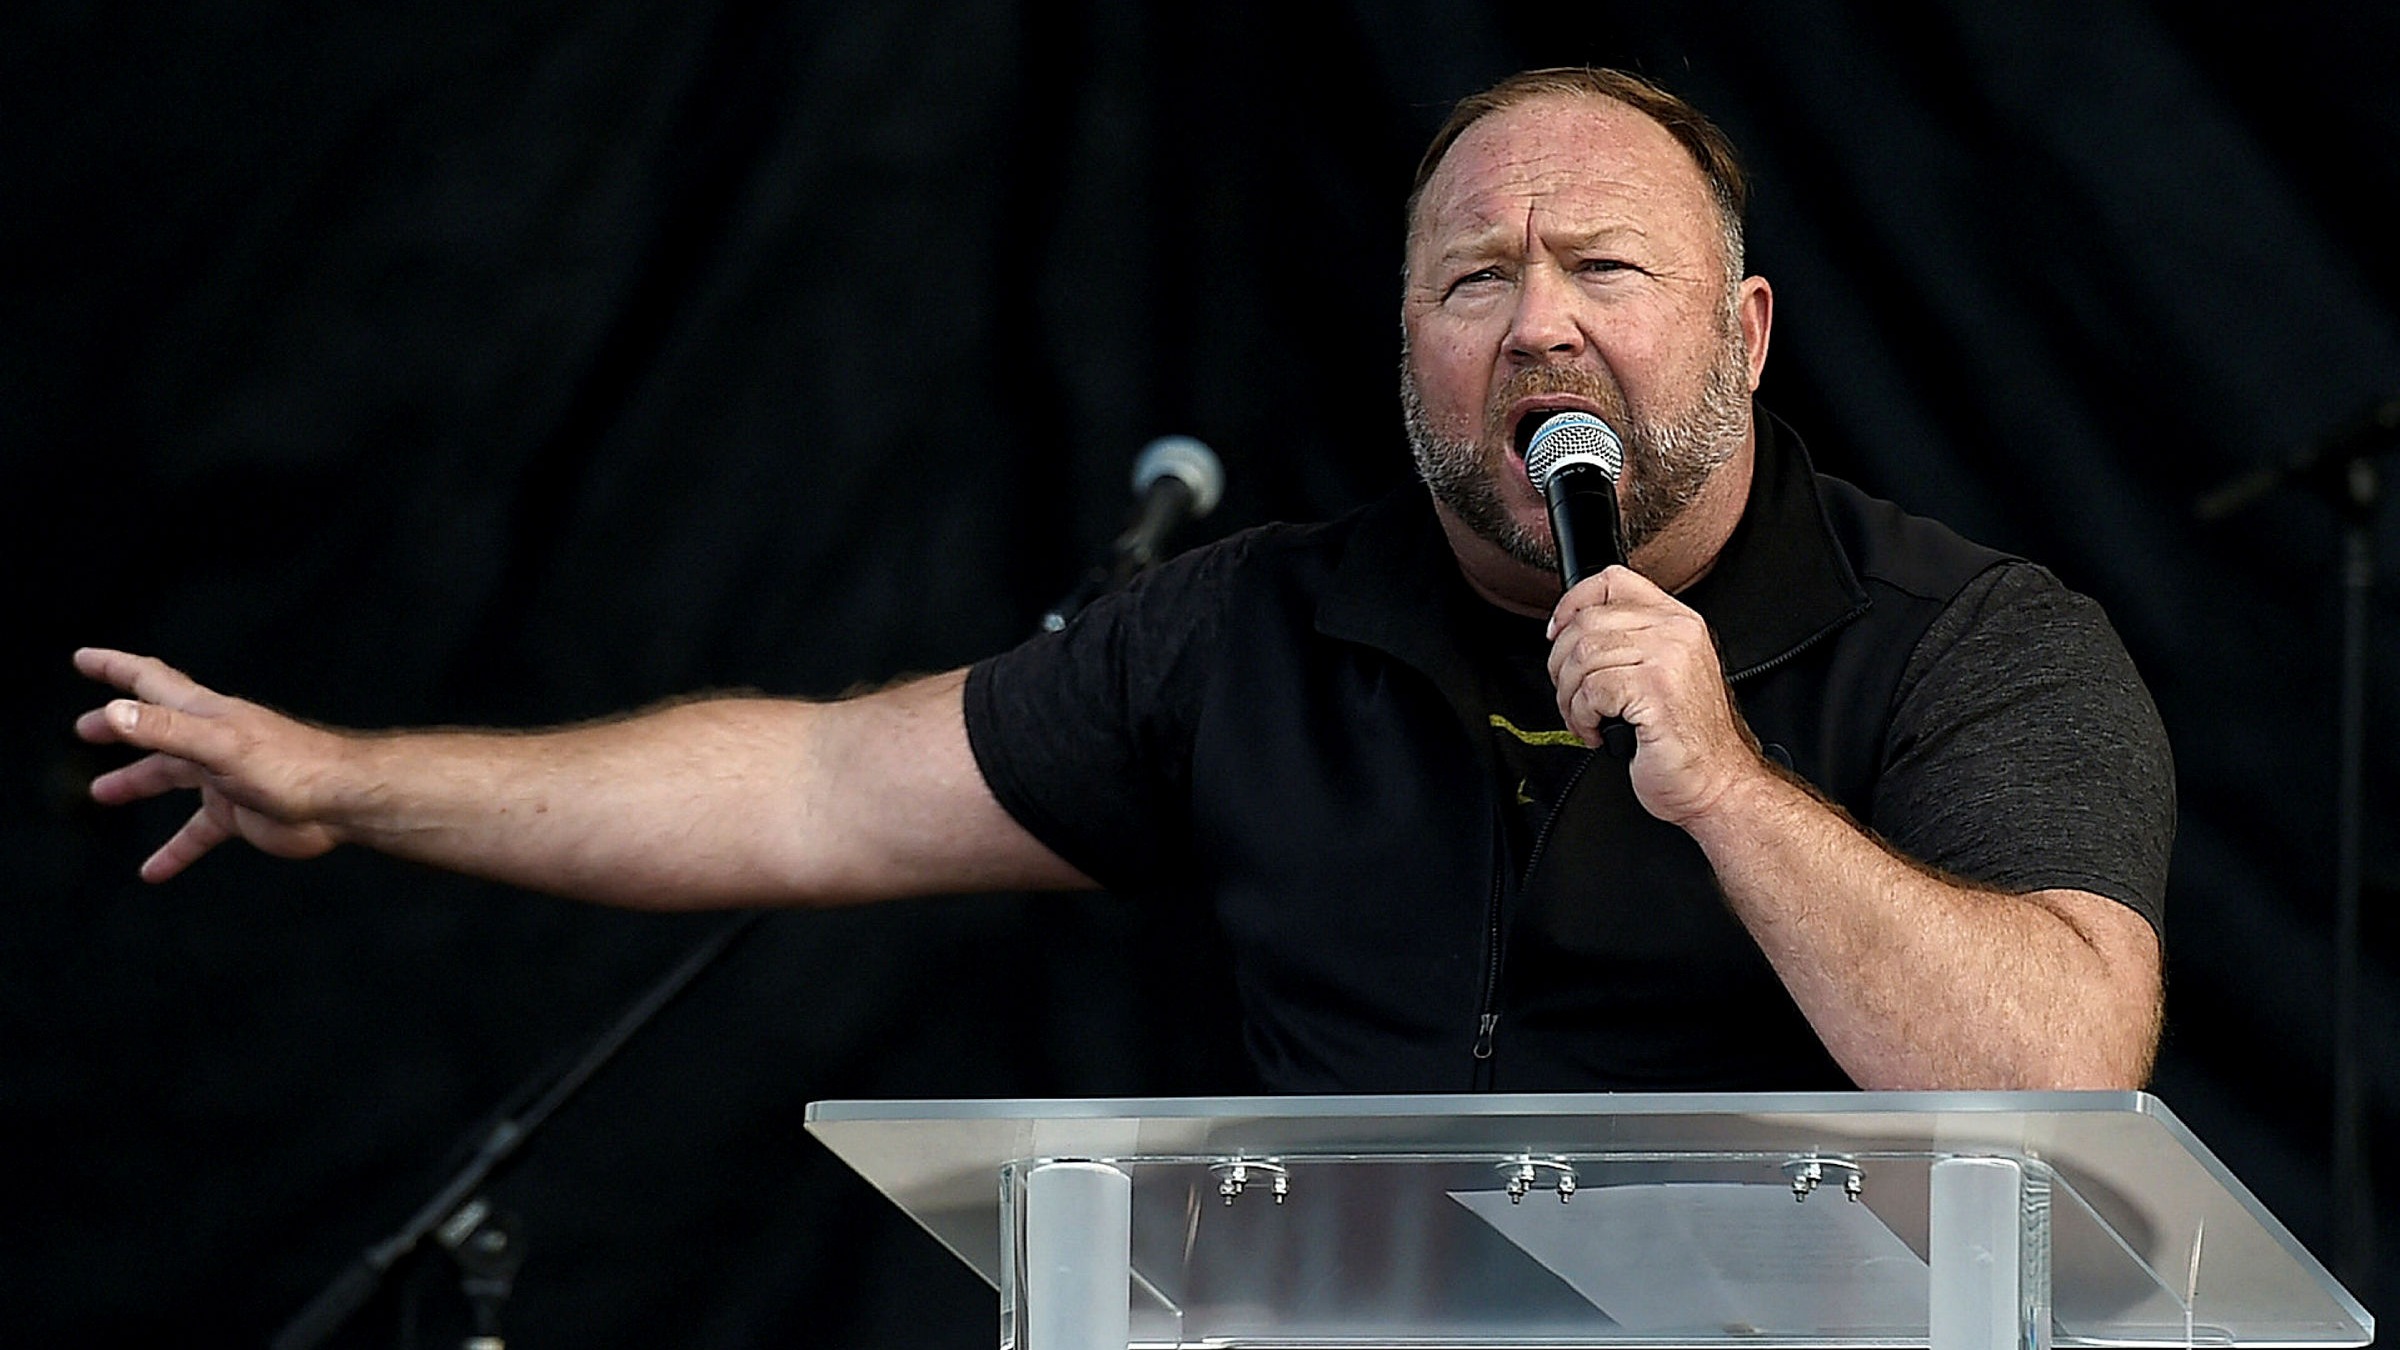 InfoWars' Alex Jones ordered to pay additional $45.2mn in Sandy Hook case |  Financial Times